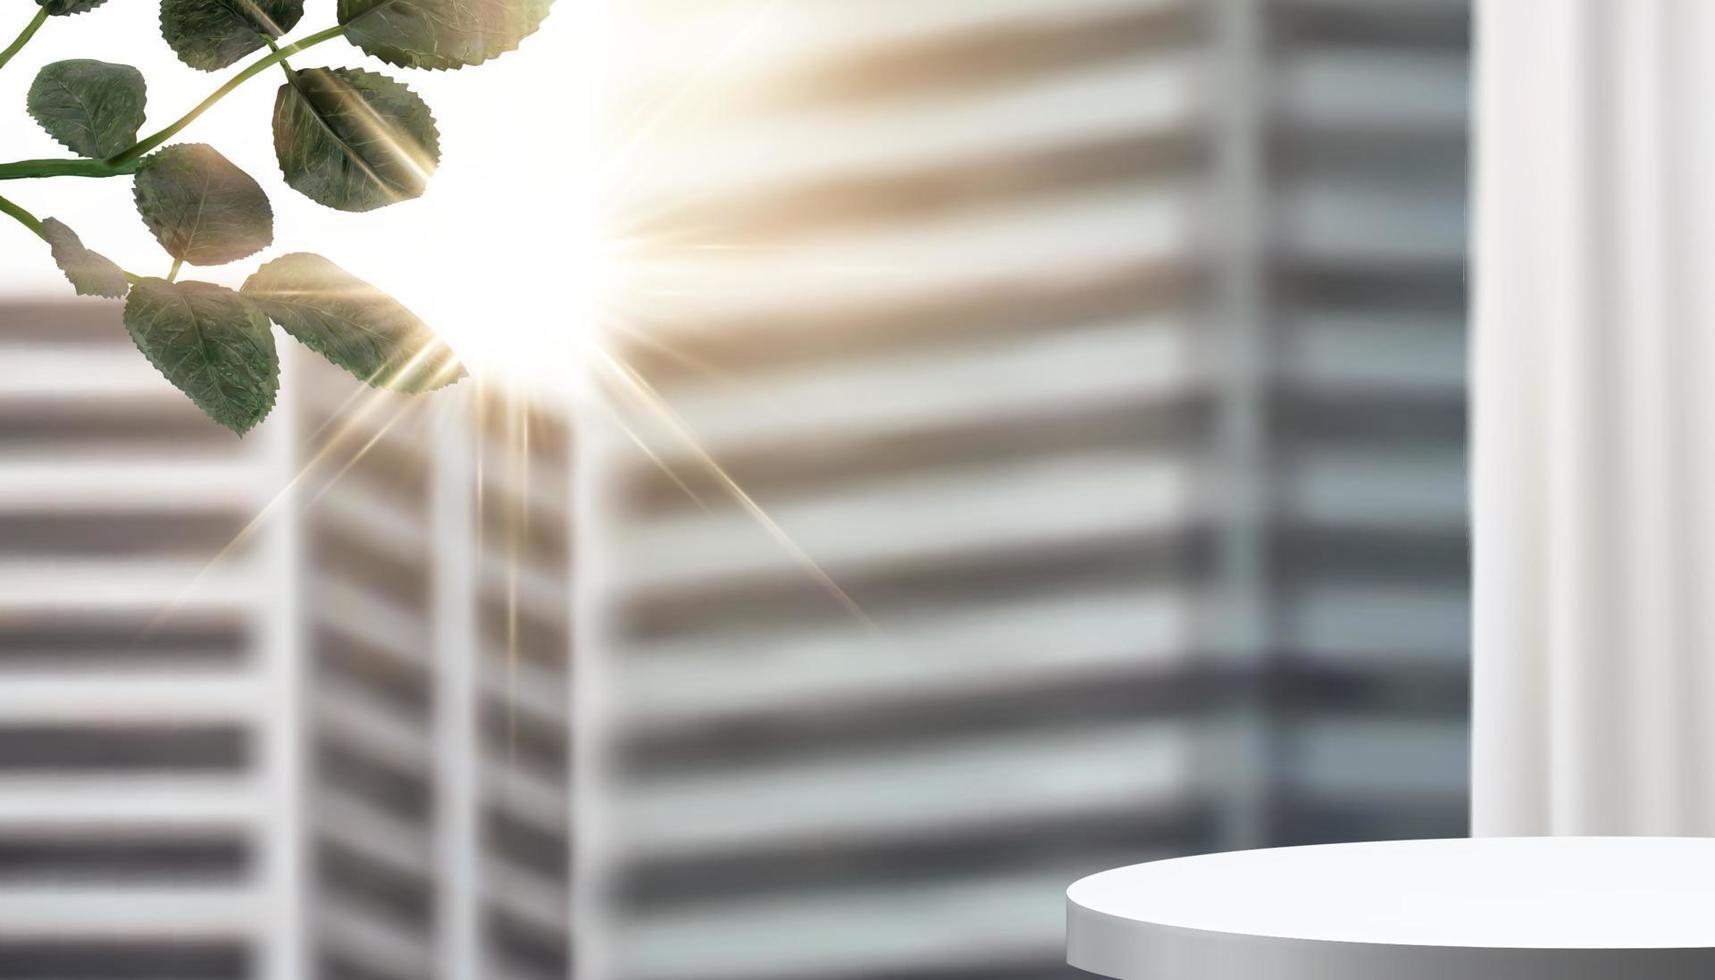 3d illustration of a product stage and plant branch in front of blurred skyscrapers with bright sunshine vector